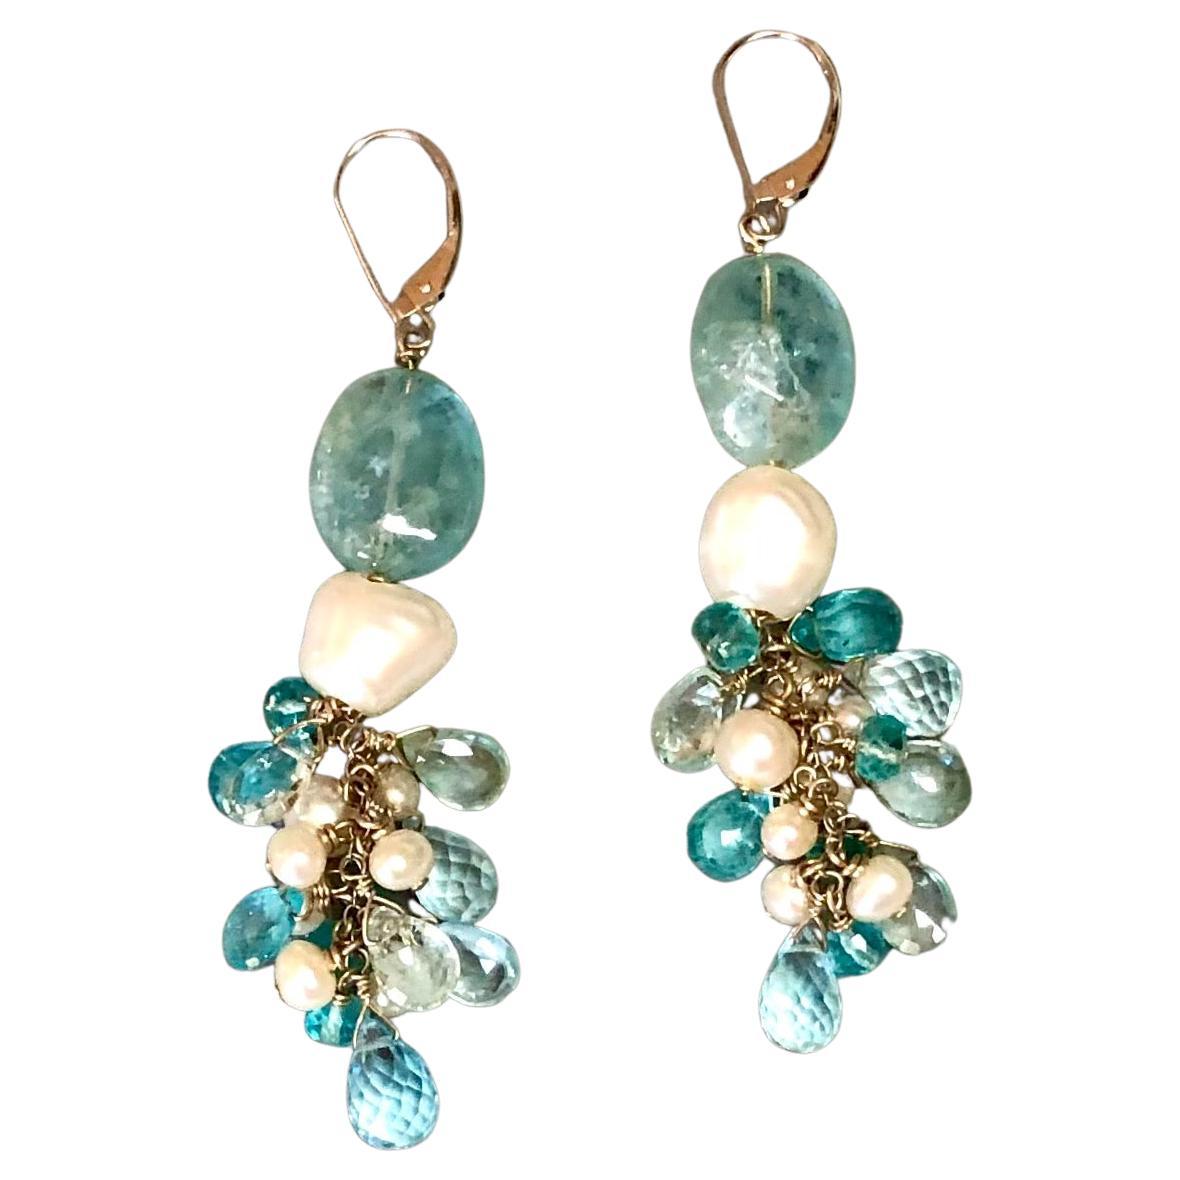 Pair of aquamarine earrings with white freshwater pearls and 14kt white gold For Sale